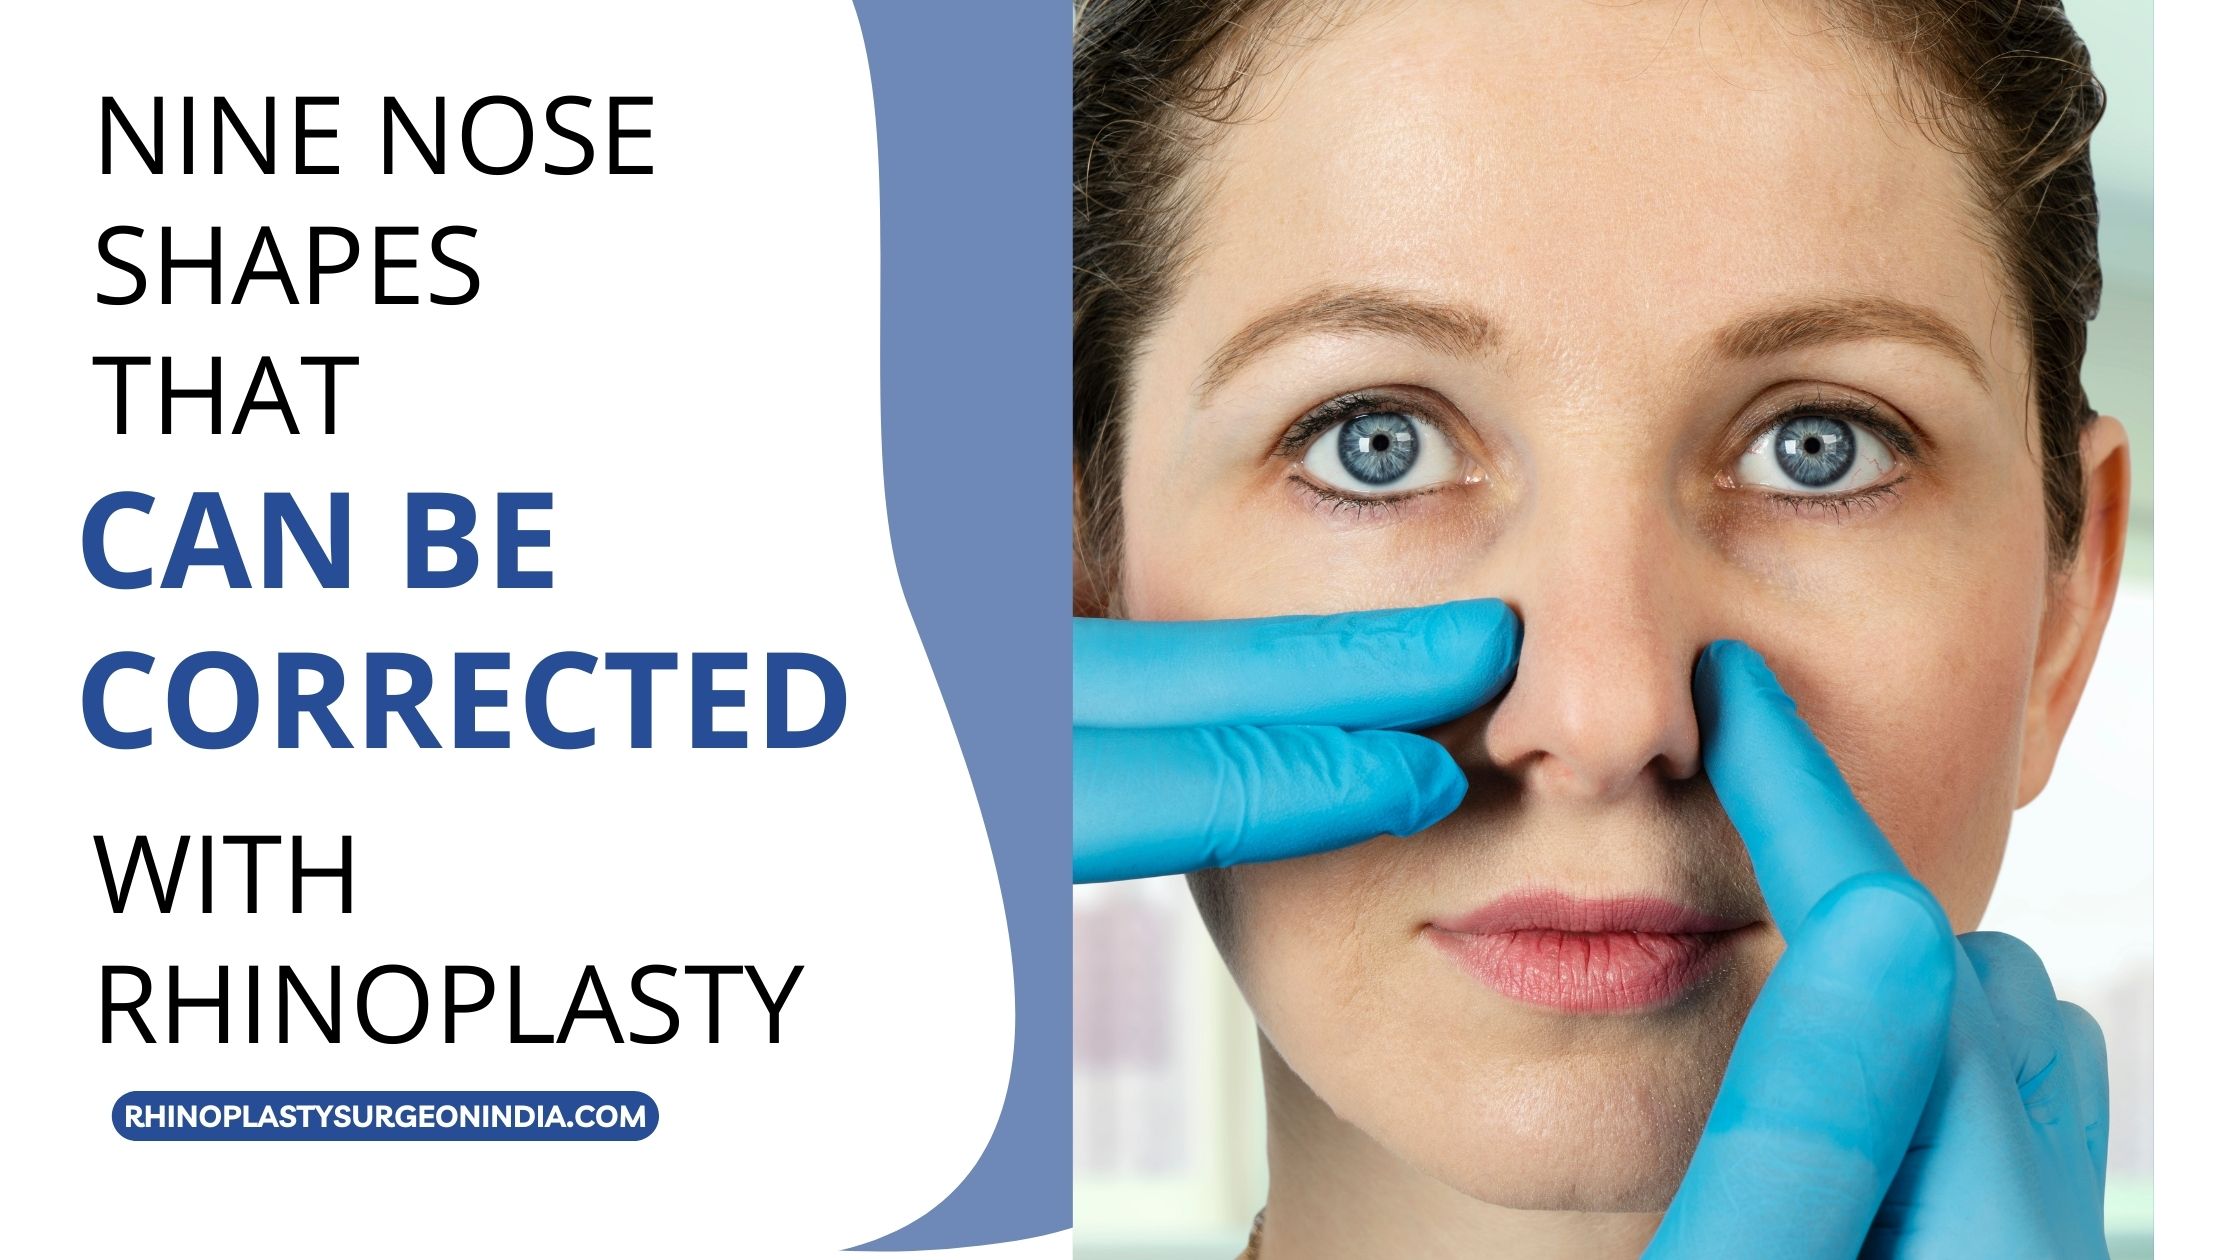 Nine Nose Shapes that Can be Corrected with Rhinoplasty